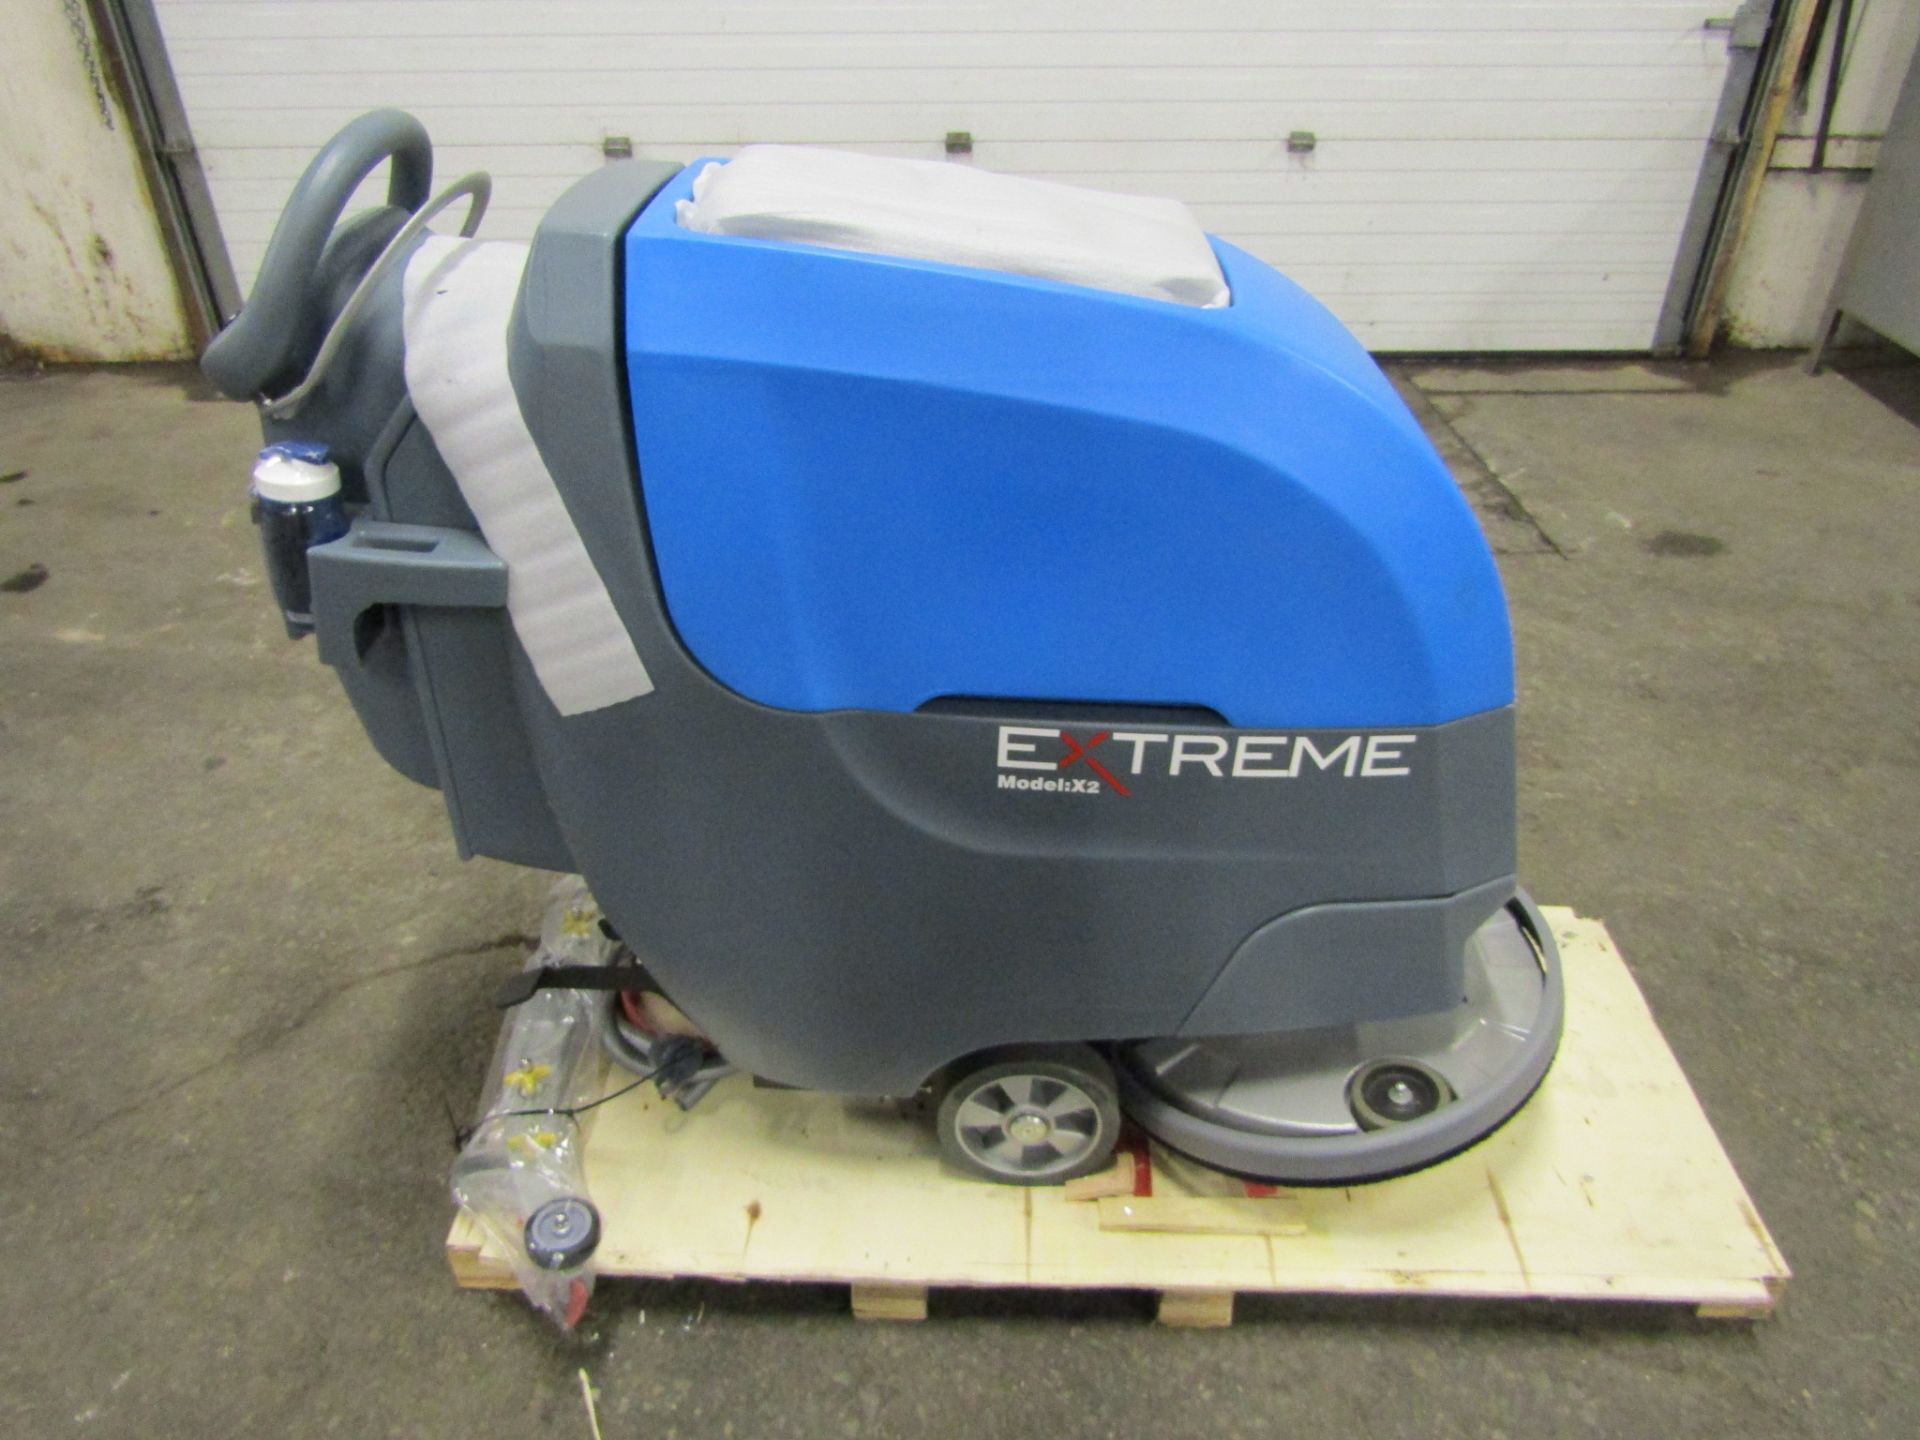 Extreme MINT Walk Behind Floor Sweeper Scrubber Unit model X2 - BRAND NEW with extra pads, digital